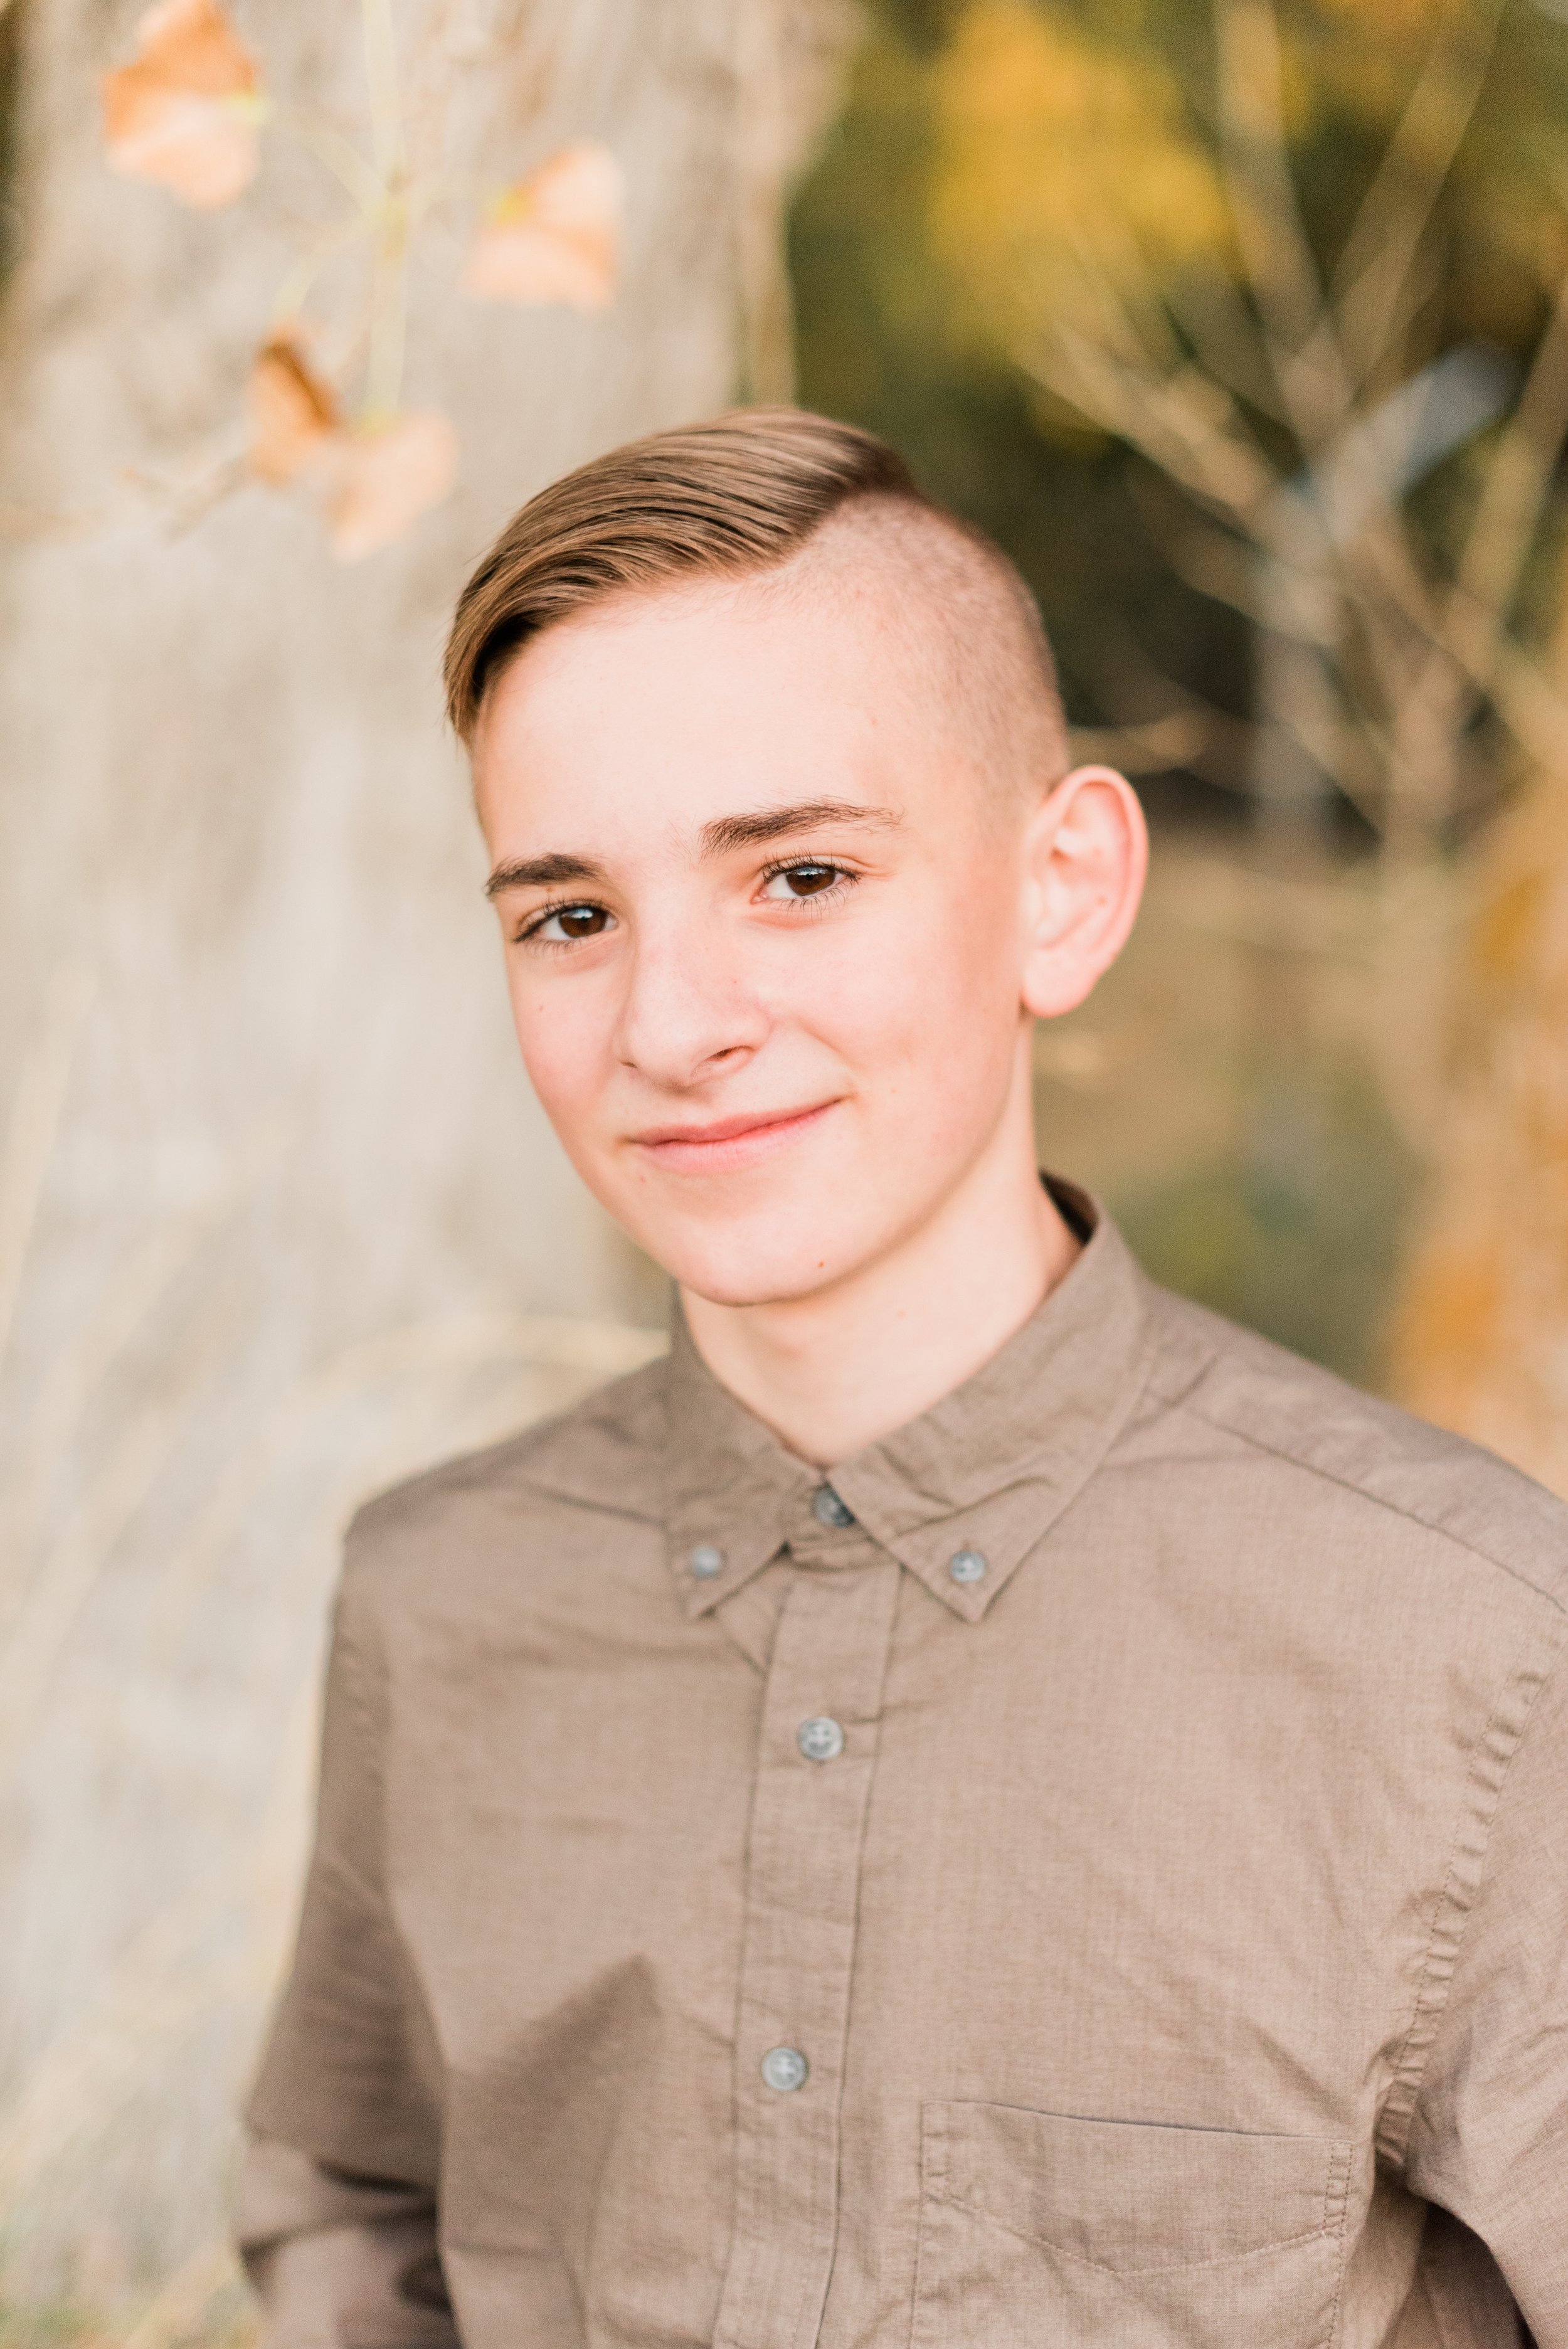  A handsome young man smiles shyly for his first day of school photo. Posing guide high school photos Senoia GA momtog course &nbsp; #diyphotography #firstdayofschoolphotos #capturethemoment #youngman #senioryear 